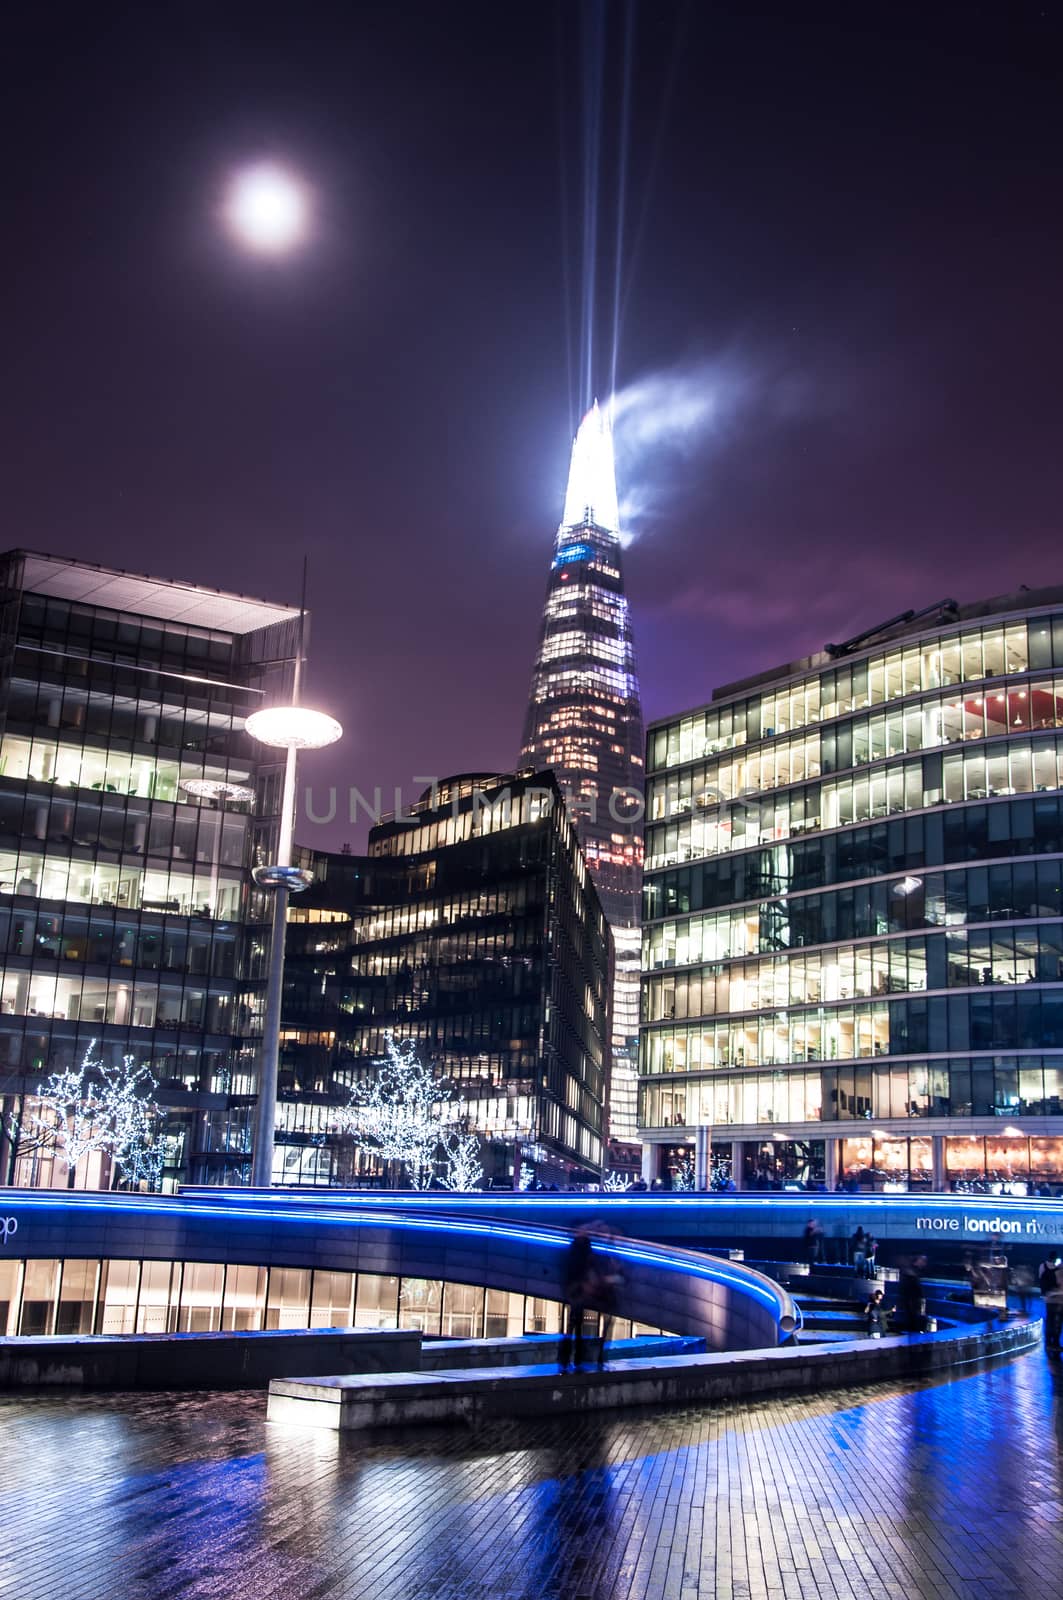 Shard building in central London - light show in New Year's Eve 2015